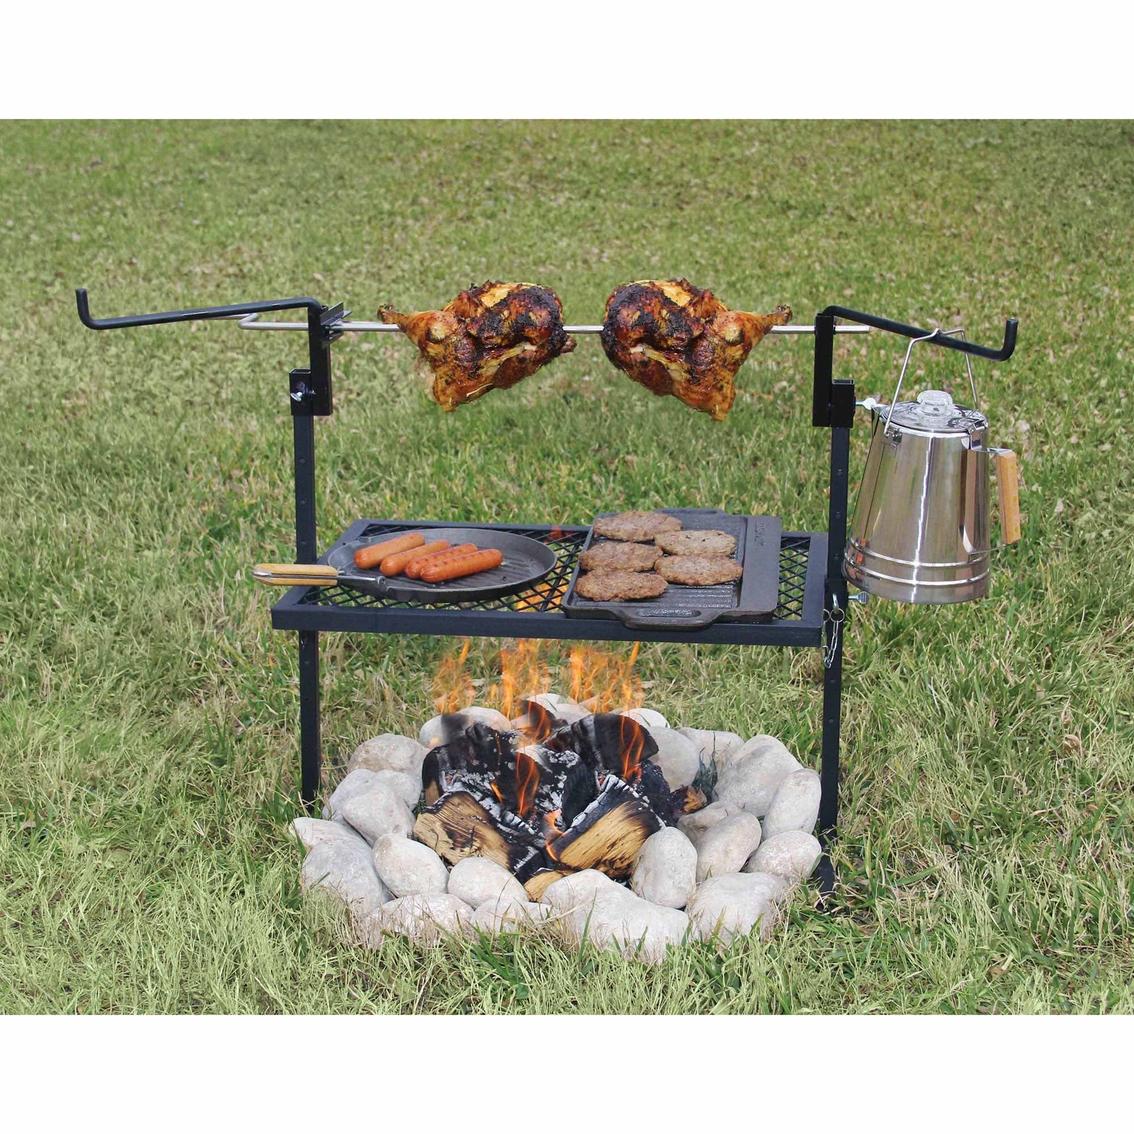 Texsport Rotisserie Grill and Spit - Image 2 of 2